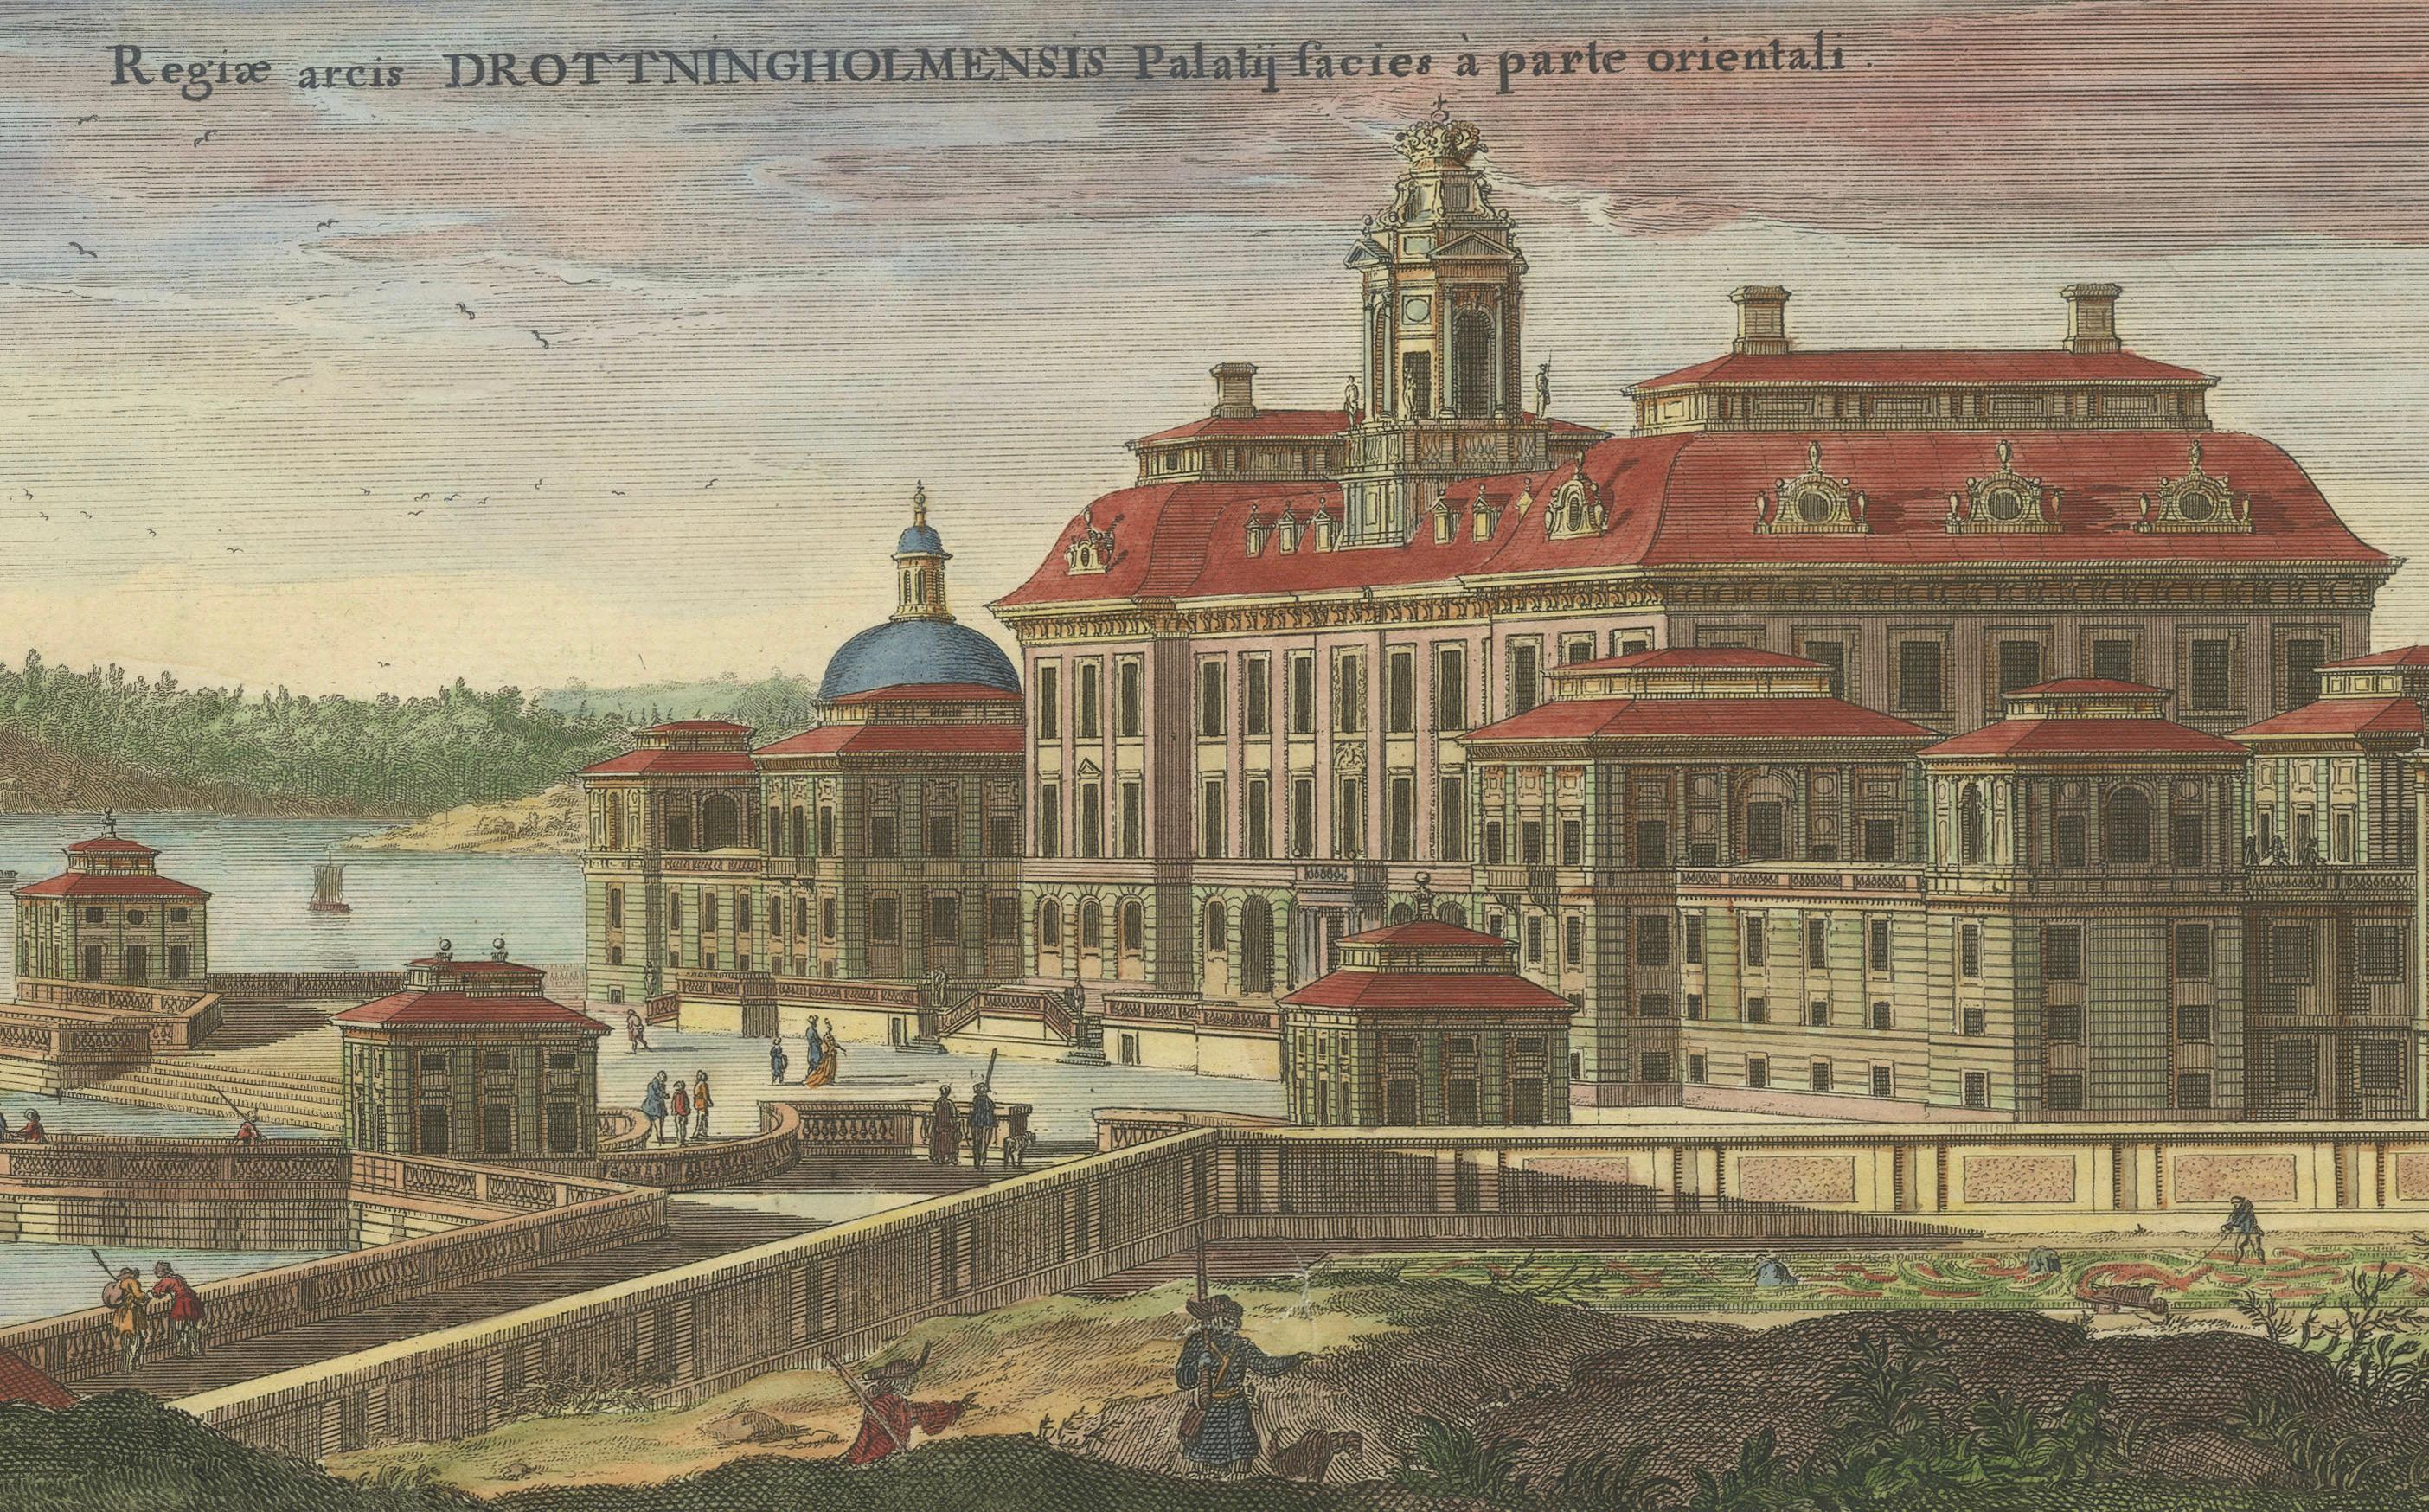 Paper Drottningholm Palace in Sweden: East and West Views by Dahlbergh, 1707 For Sale